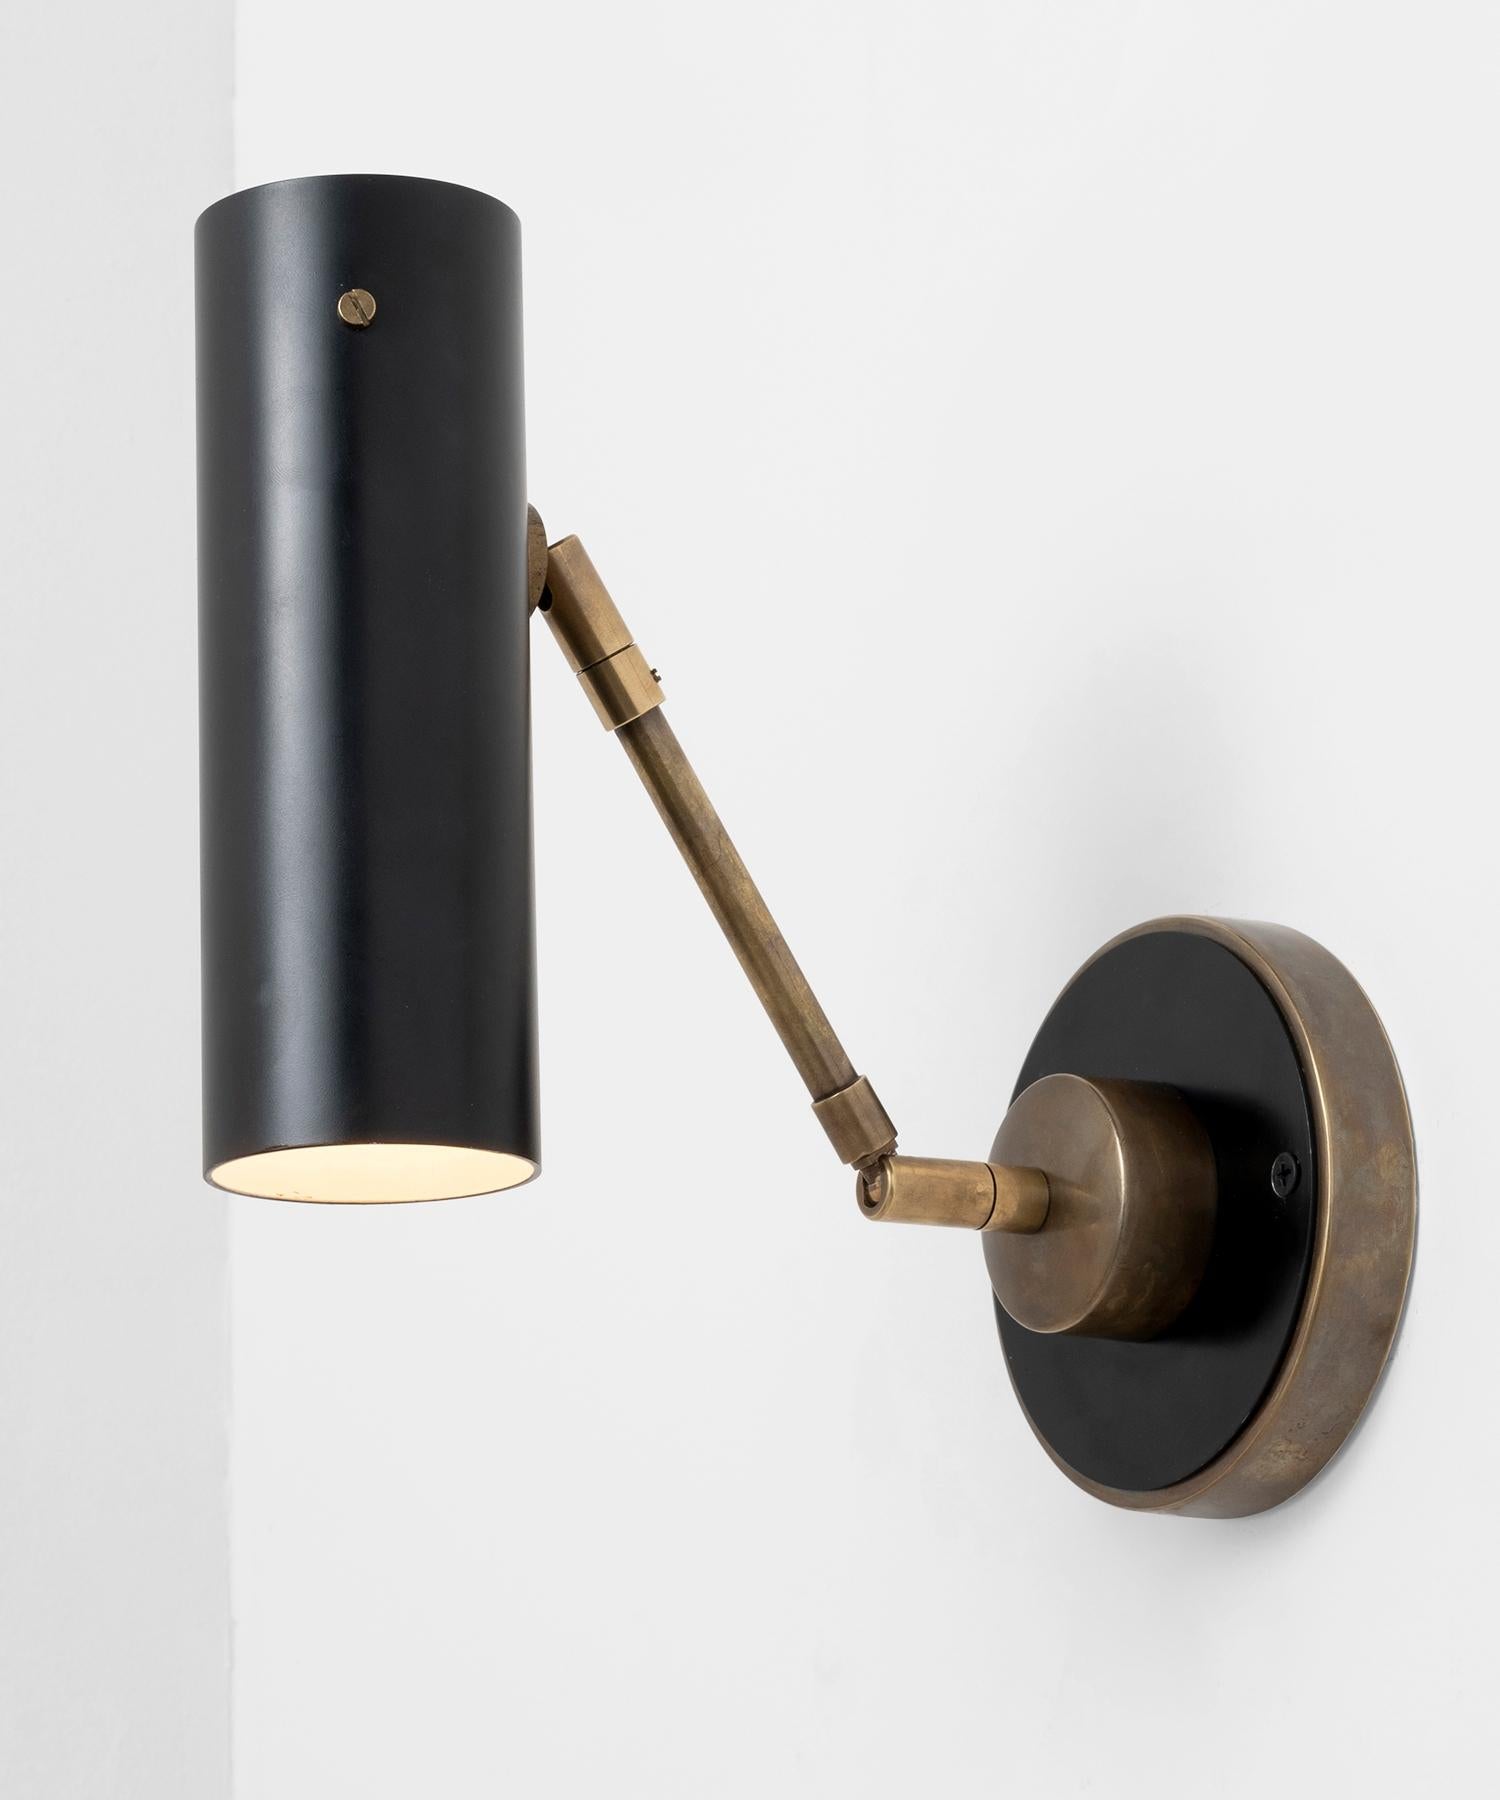 Adjustable wall lights in the style of Tito Agnoli.

Made in Italy

*Please Note: This fixture is made to order in Italy, and comes newly wired (eu wiring). It is not UL Listed. Standard Lead Time is 4-6 Weeks. We do not offer rewiring / UL listing